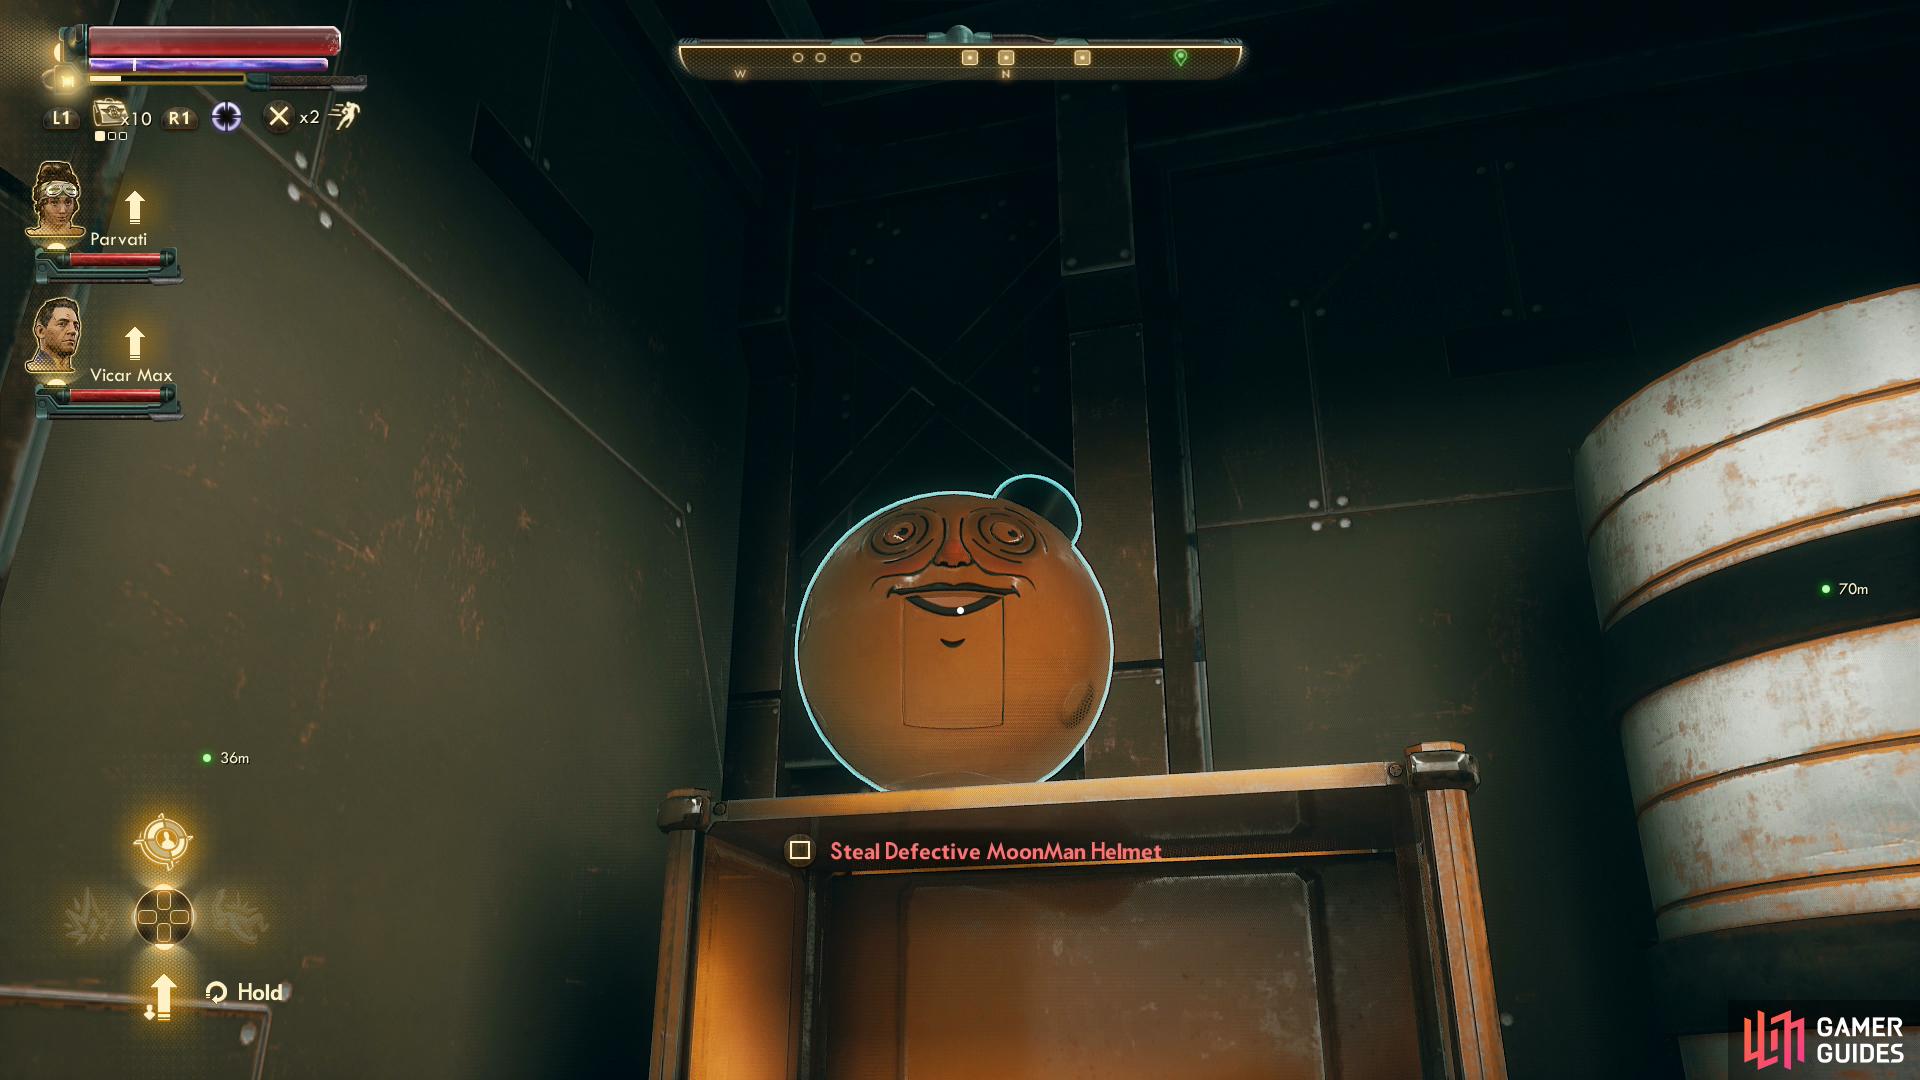 Break into the back room and steal a Defective Moonman Helmet.